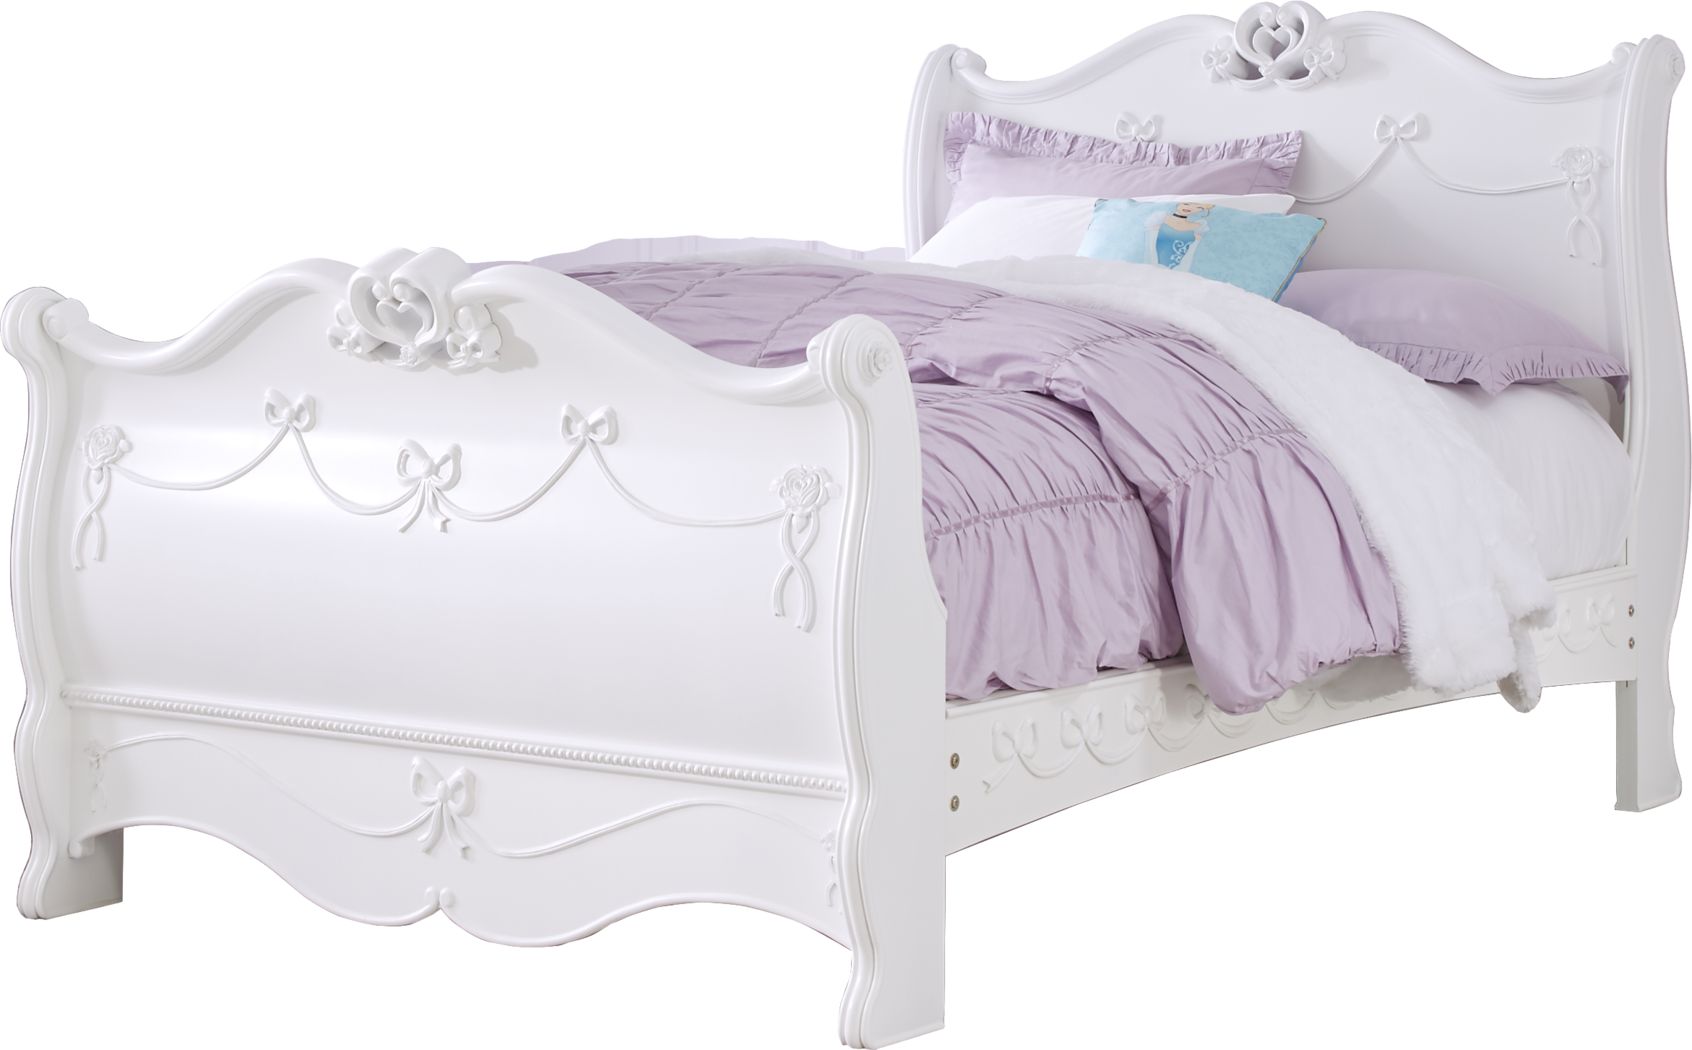 Pc Twin Sleigh Bed, Disney Princess Bunk Bed Rooms To Go